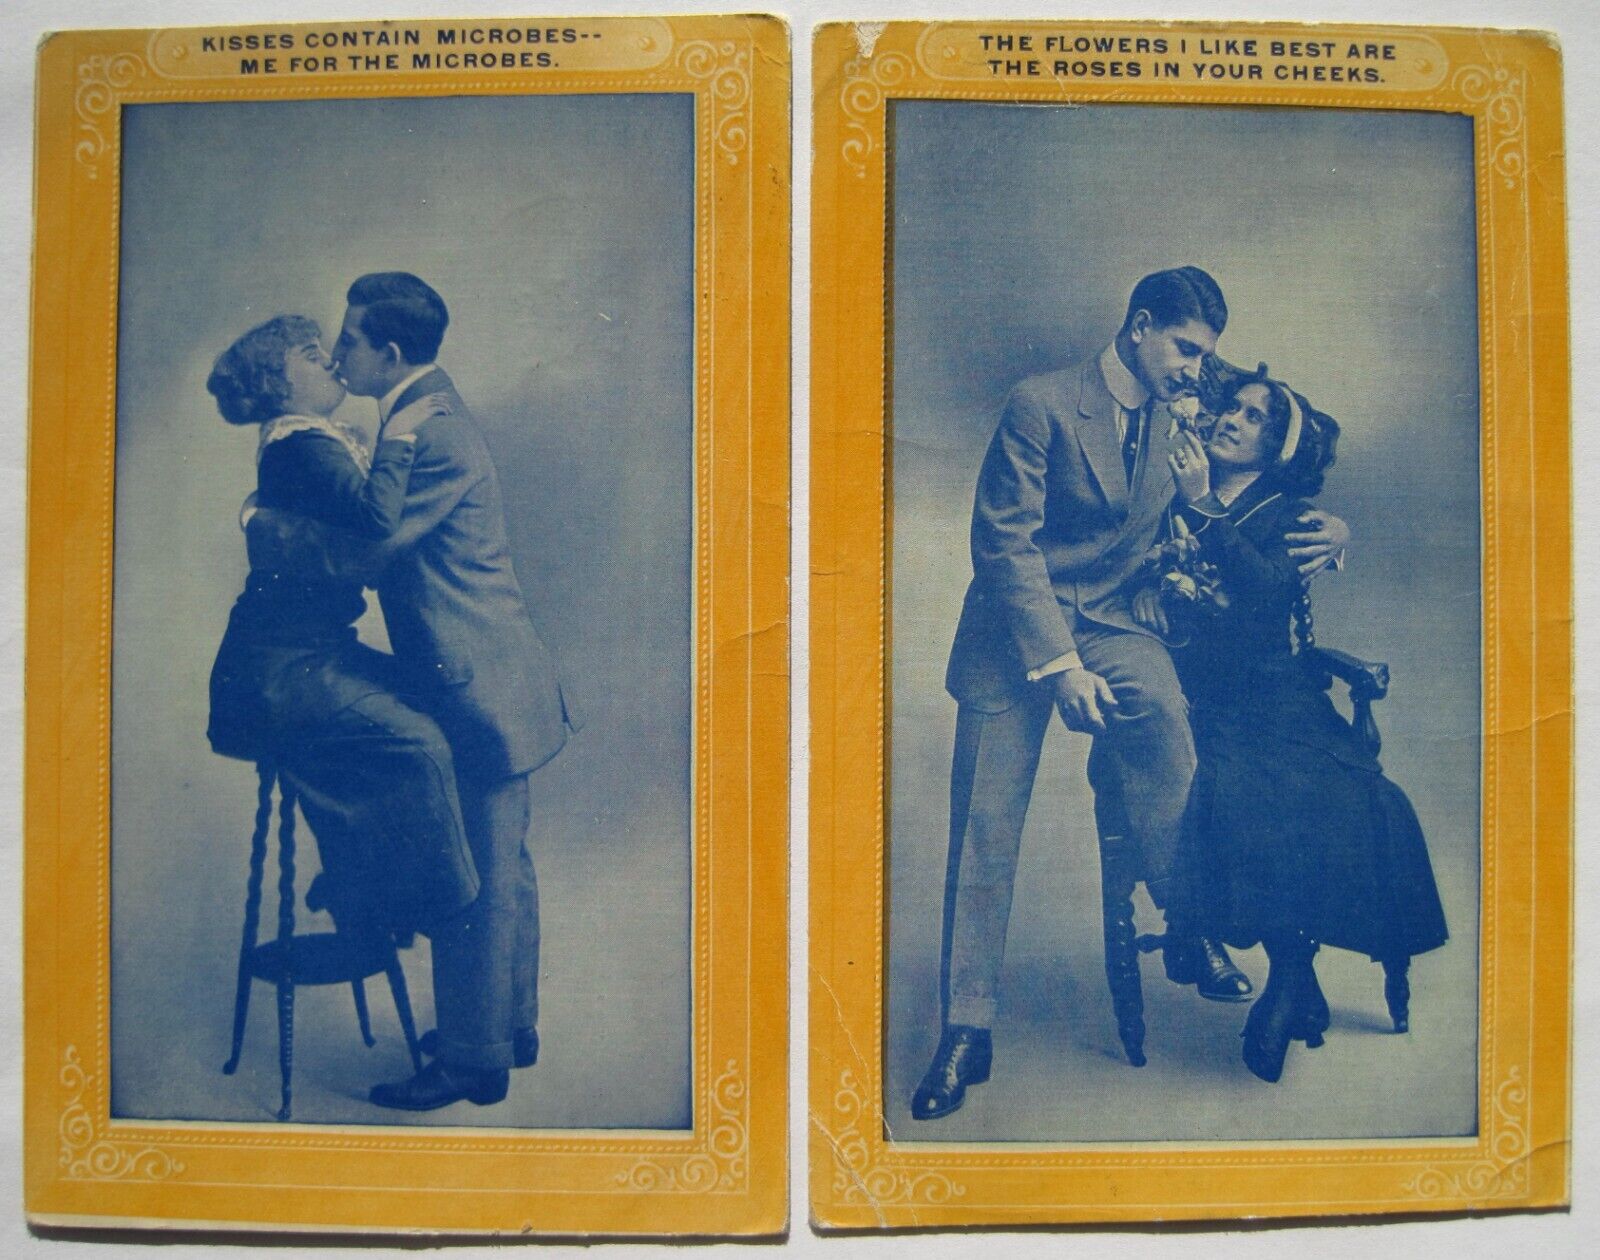 Couple Kissing; Spread Microbes; 2 Old 1911-12 Lovers Postcards